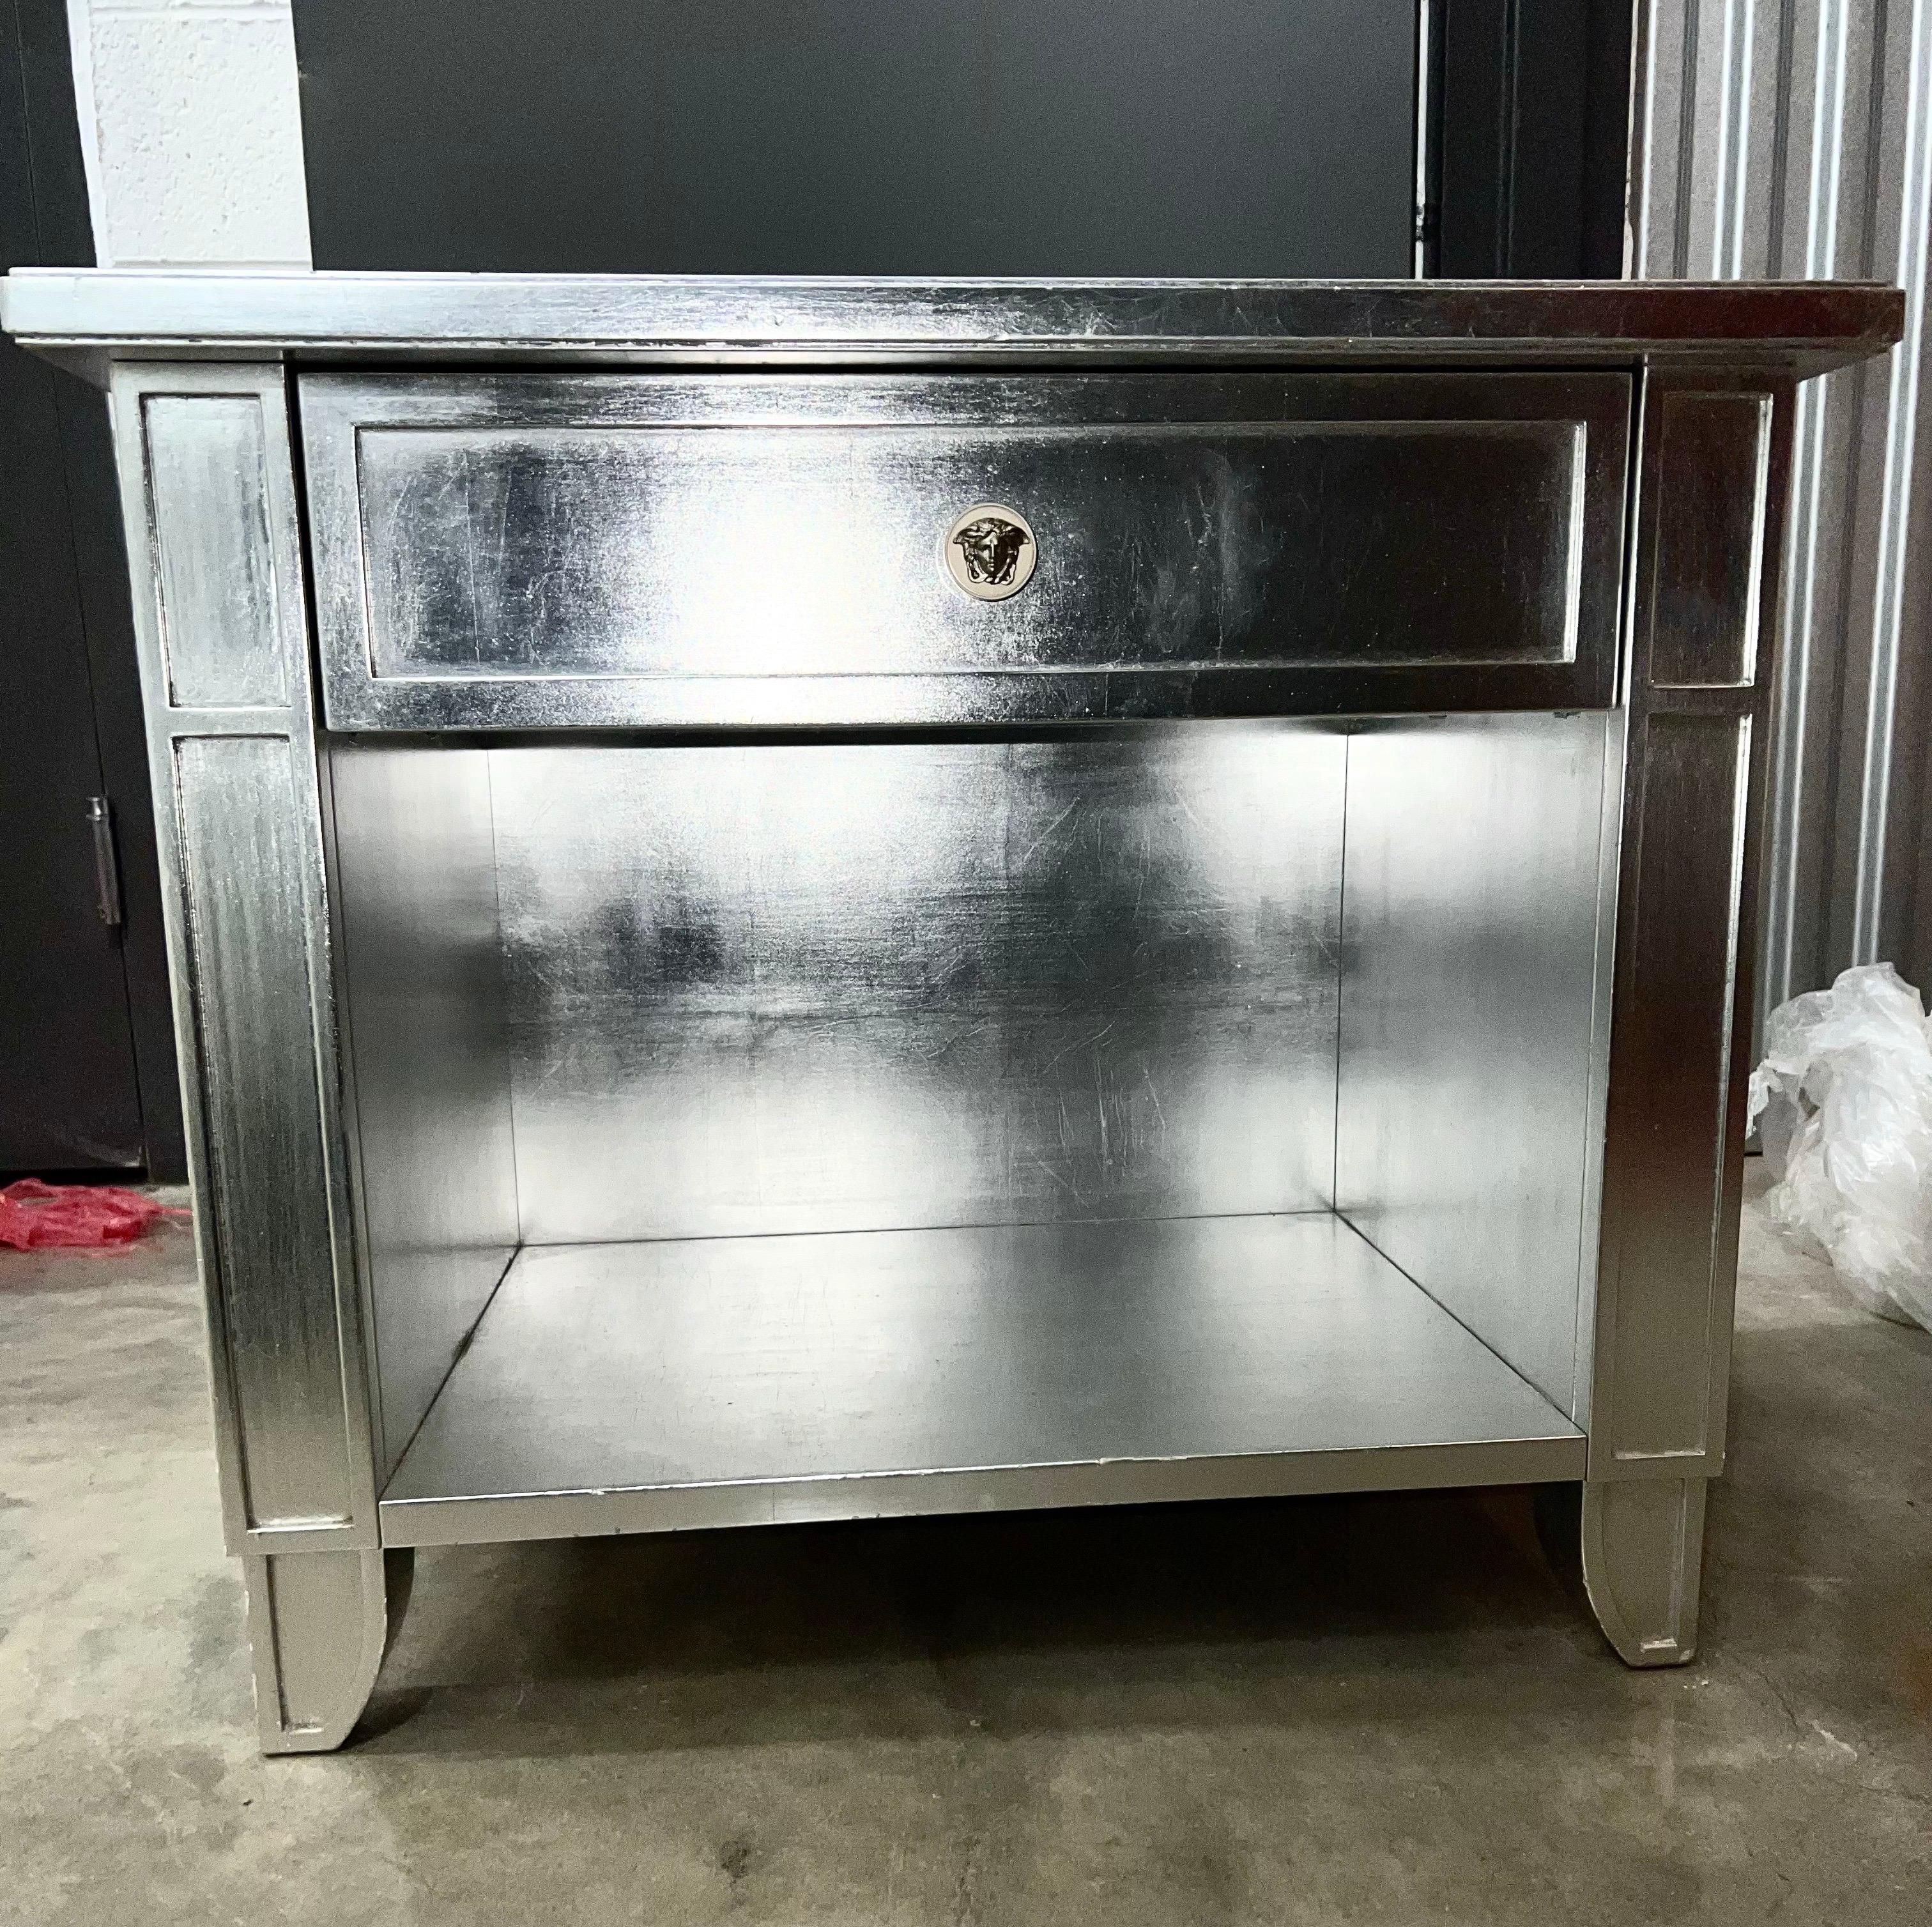 Versace silvered end tables with drawer, Medusa handle, Gianni Versace, c. 1995. Silver leaf covers entire piece. This listing is for the pair. Can be used as side / end tables and/or nightstands. Versace Medusa pulls. Made in Italy. All original.